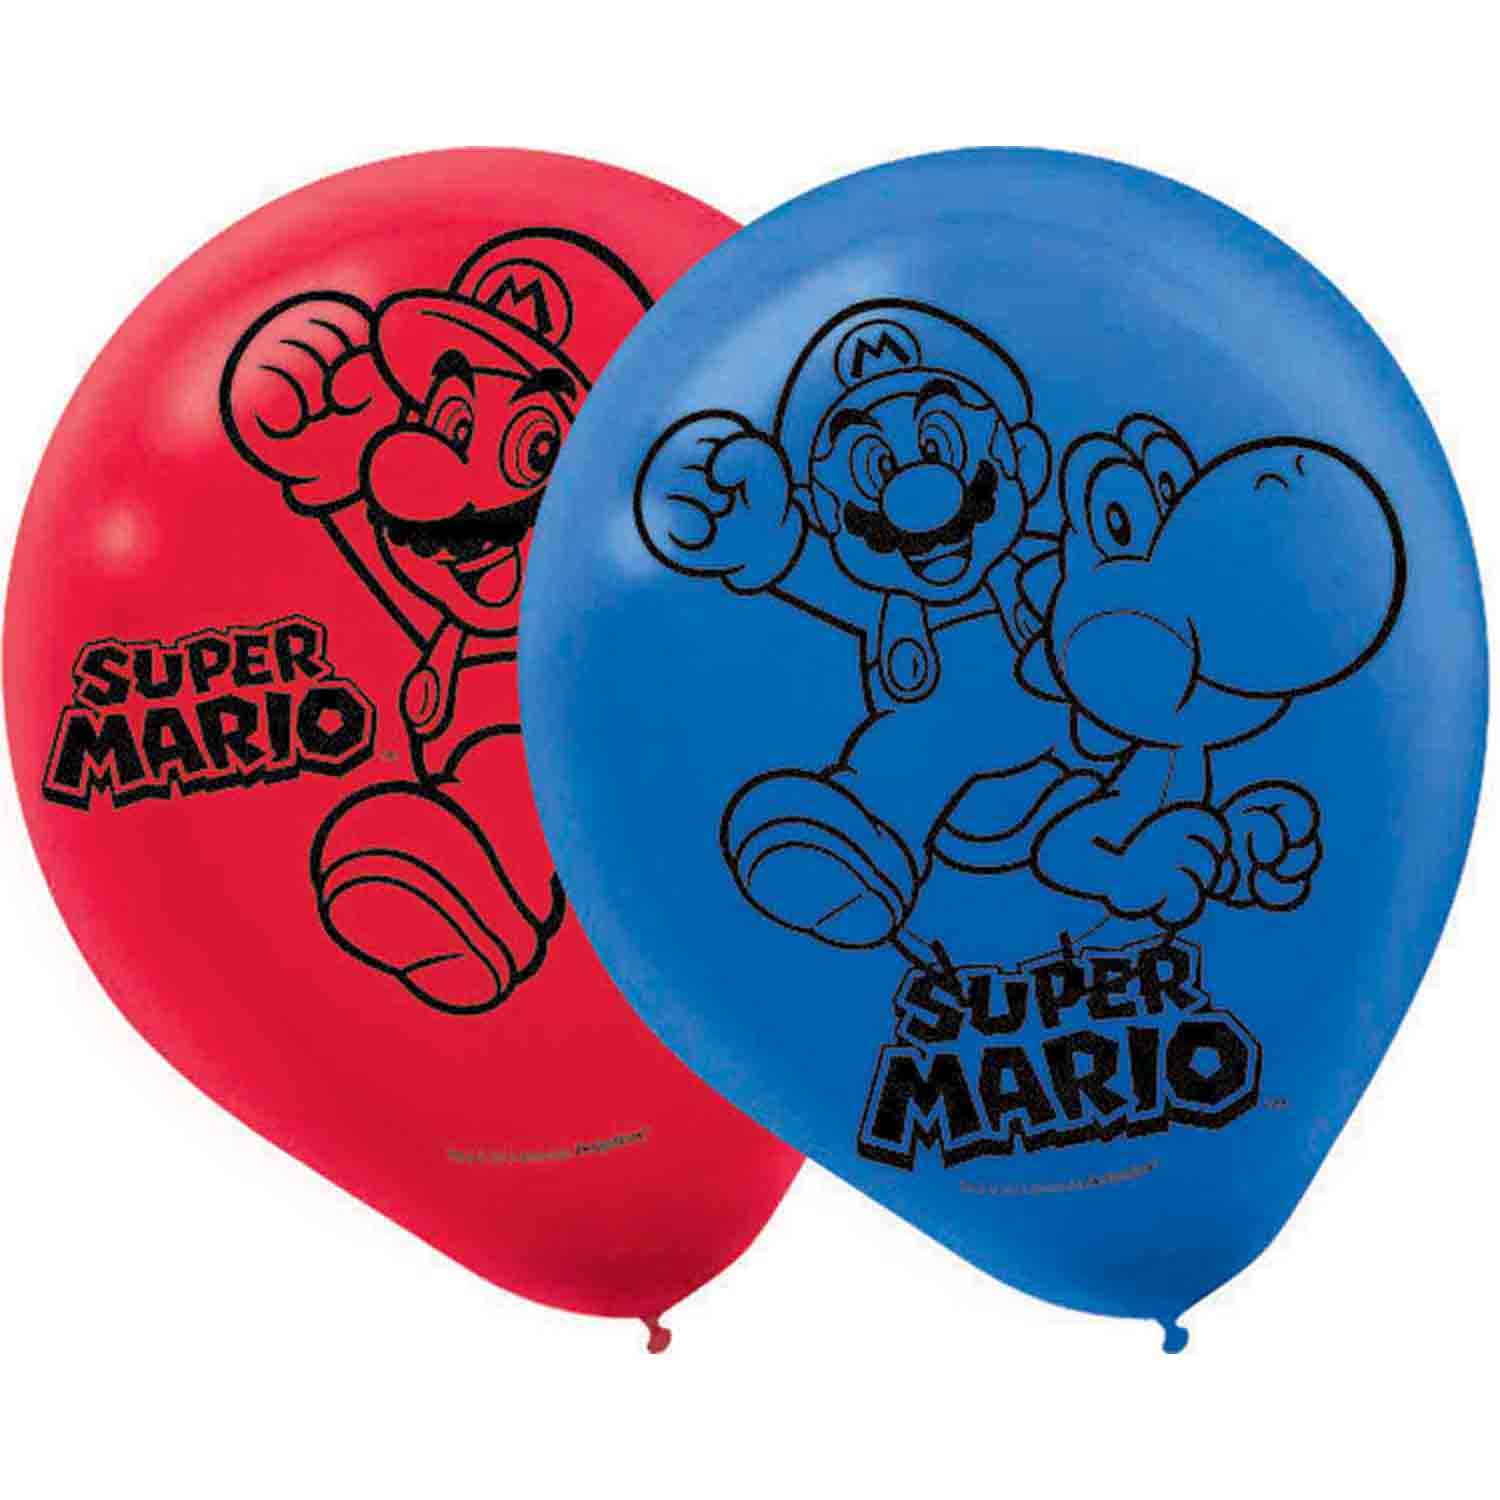 Super Mario Brothers Latex Balloons - 30cm 6 Pack Default Title